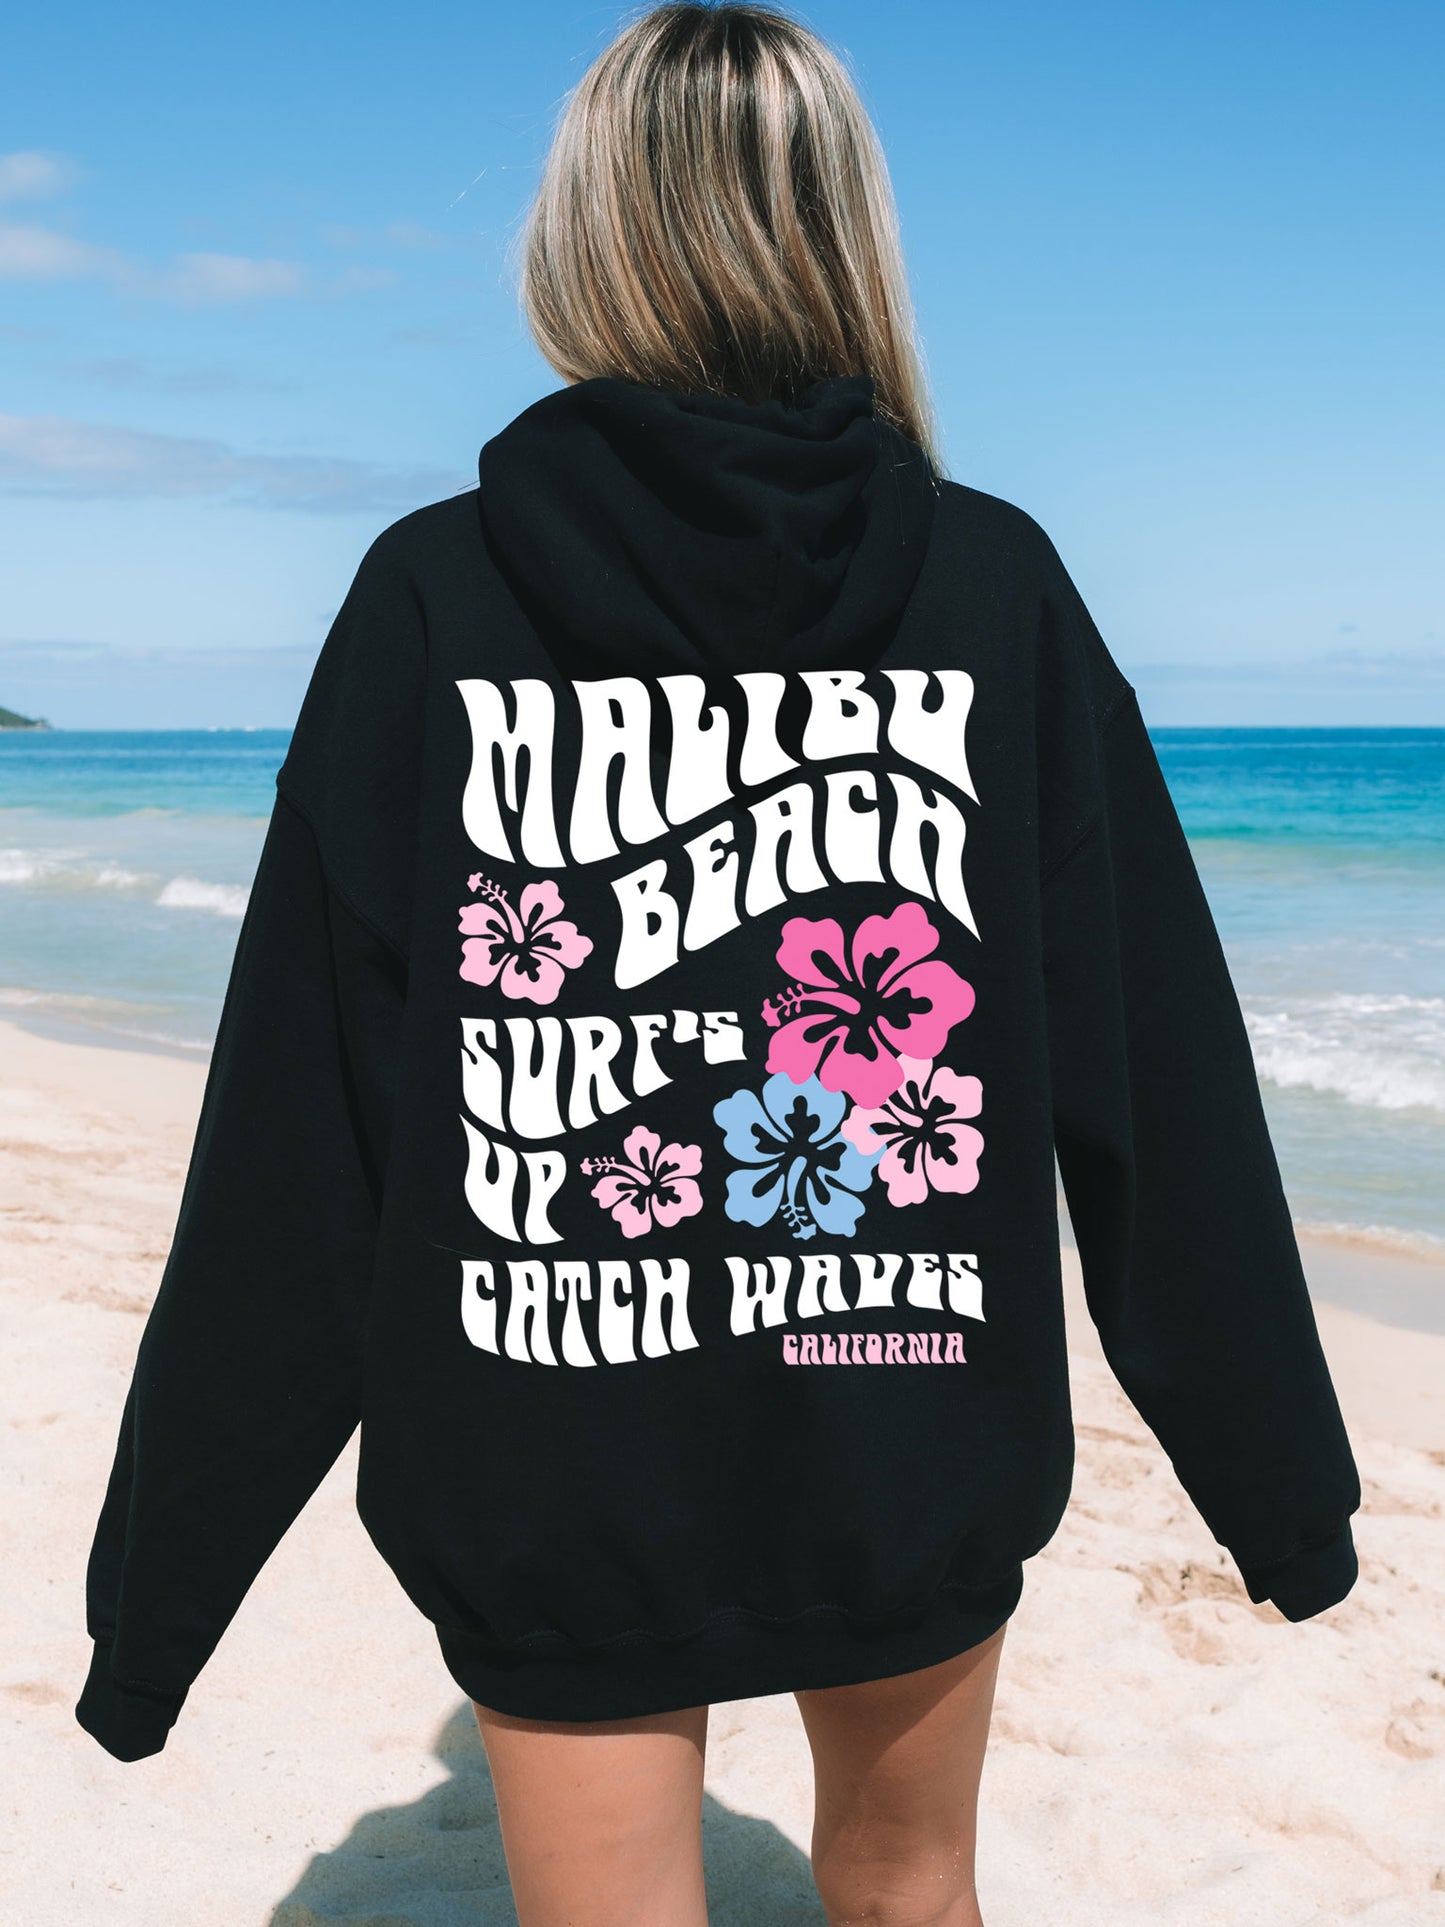 Coconut Girl Hibiscus Surf Hoodie Black with White and Colorful Ink Malibu Beach California